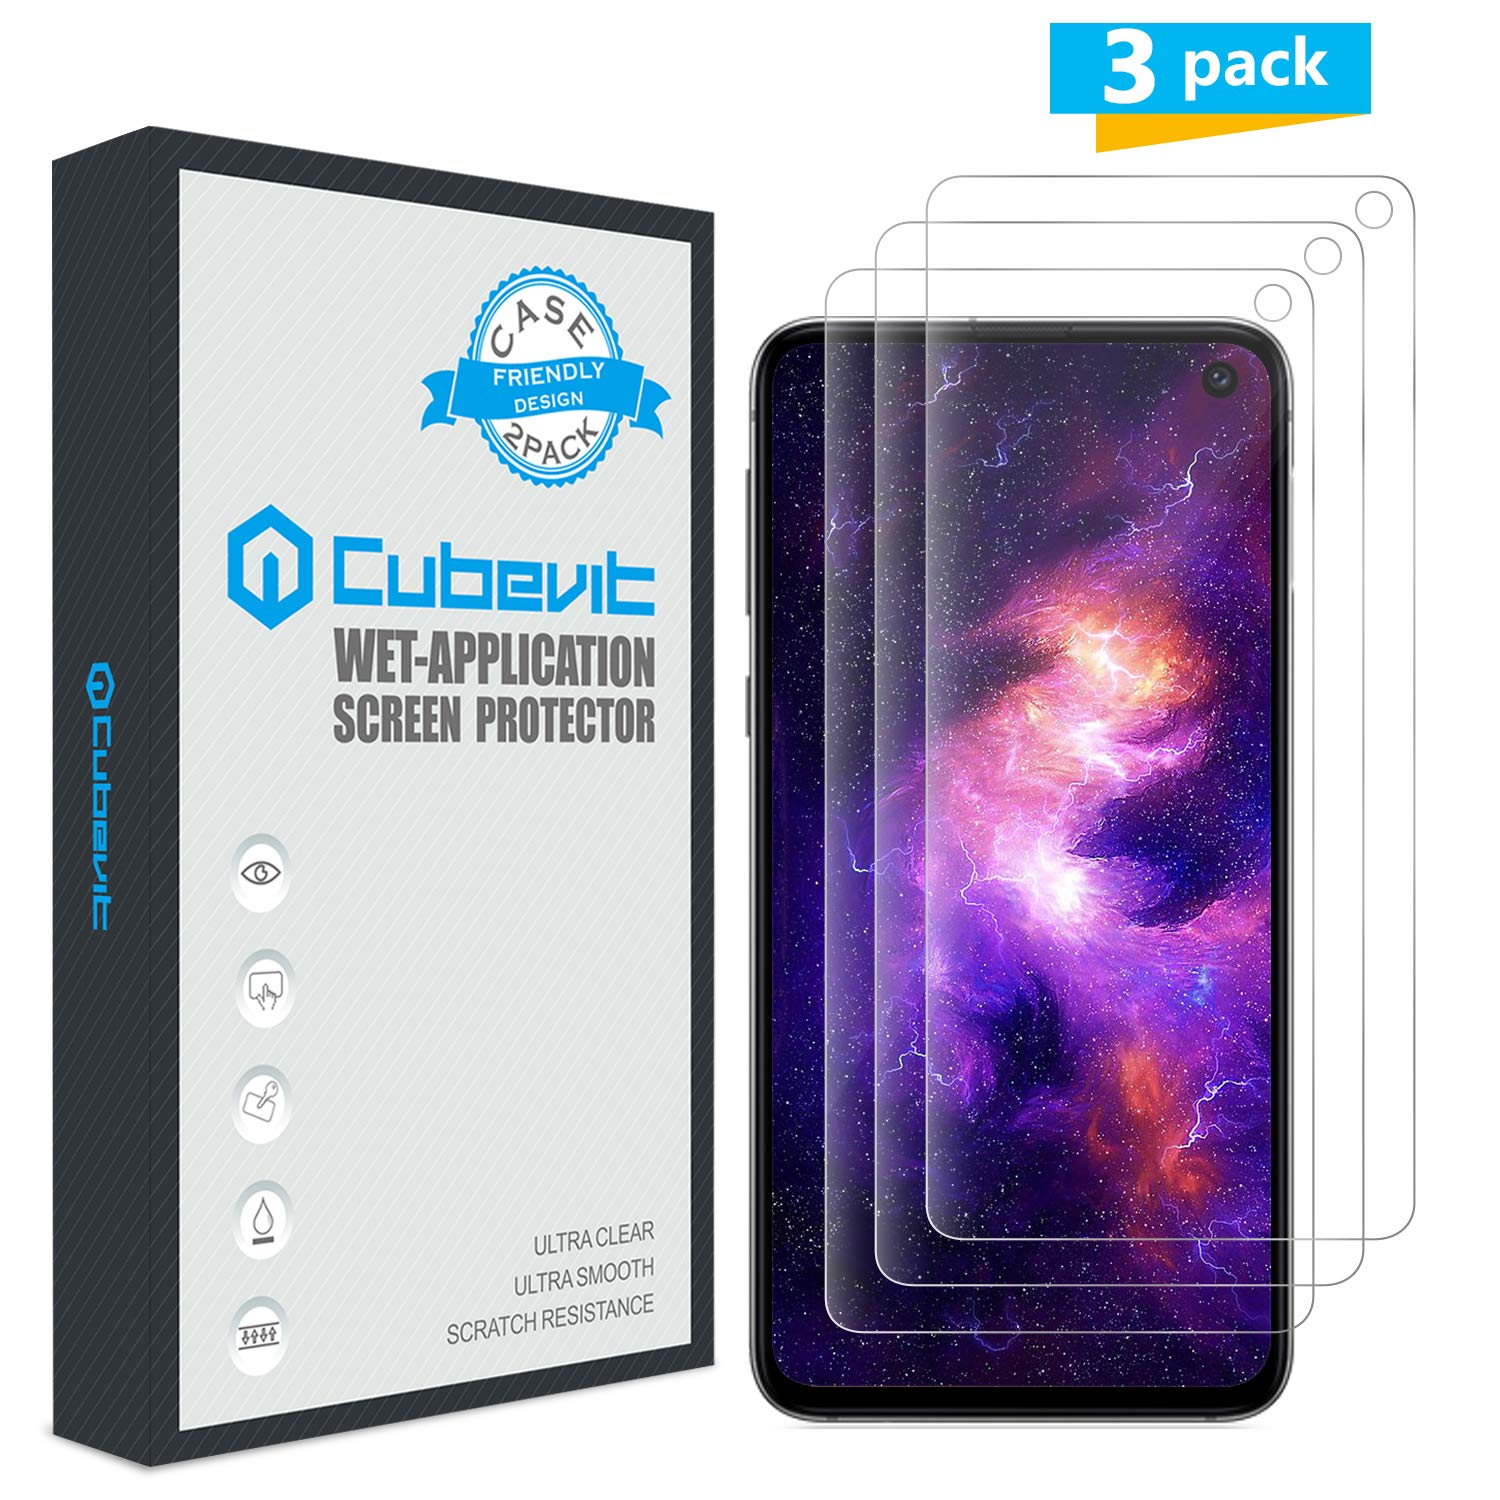 Galaxy S10 Screen Protector by Cubevit 